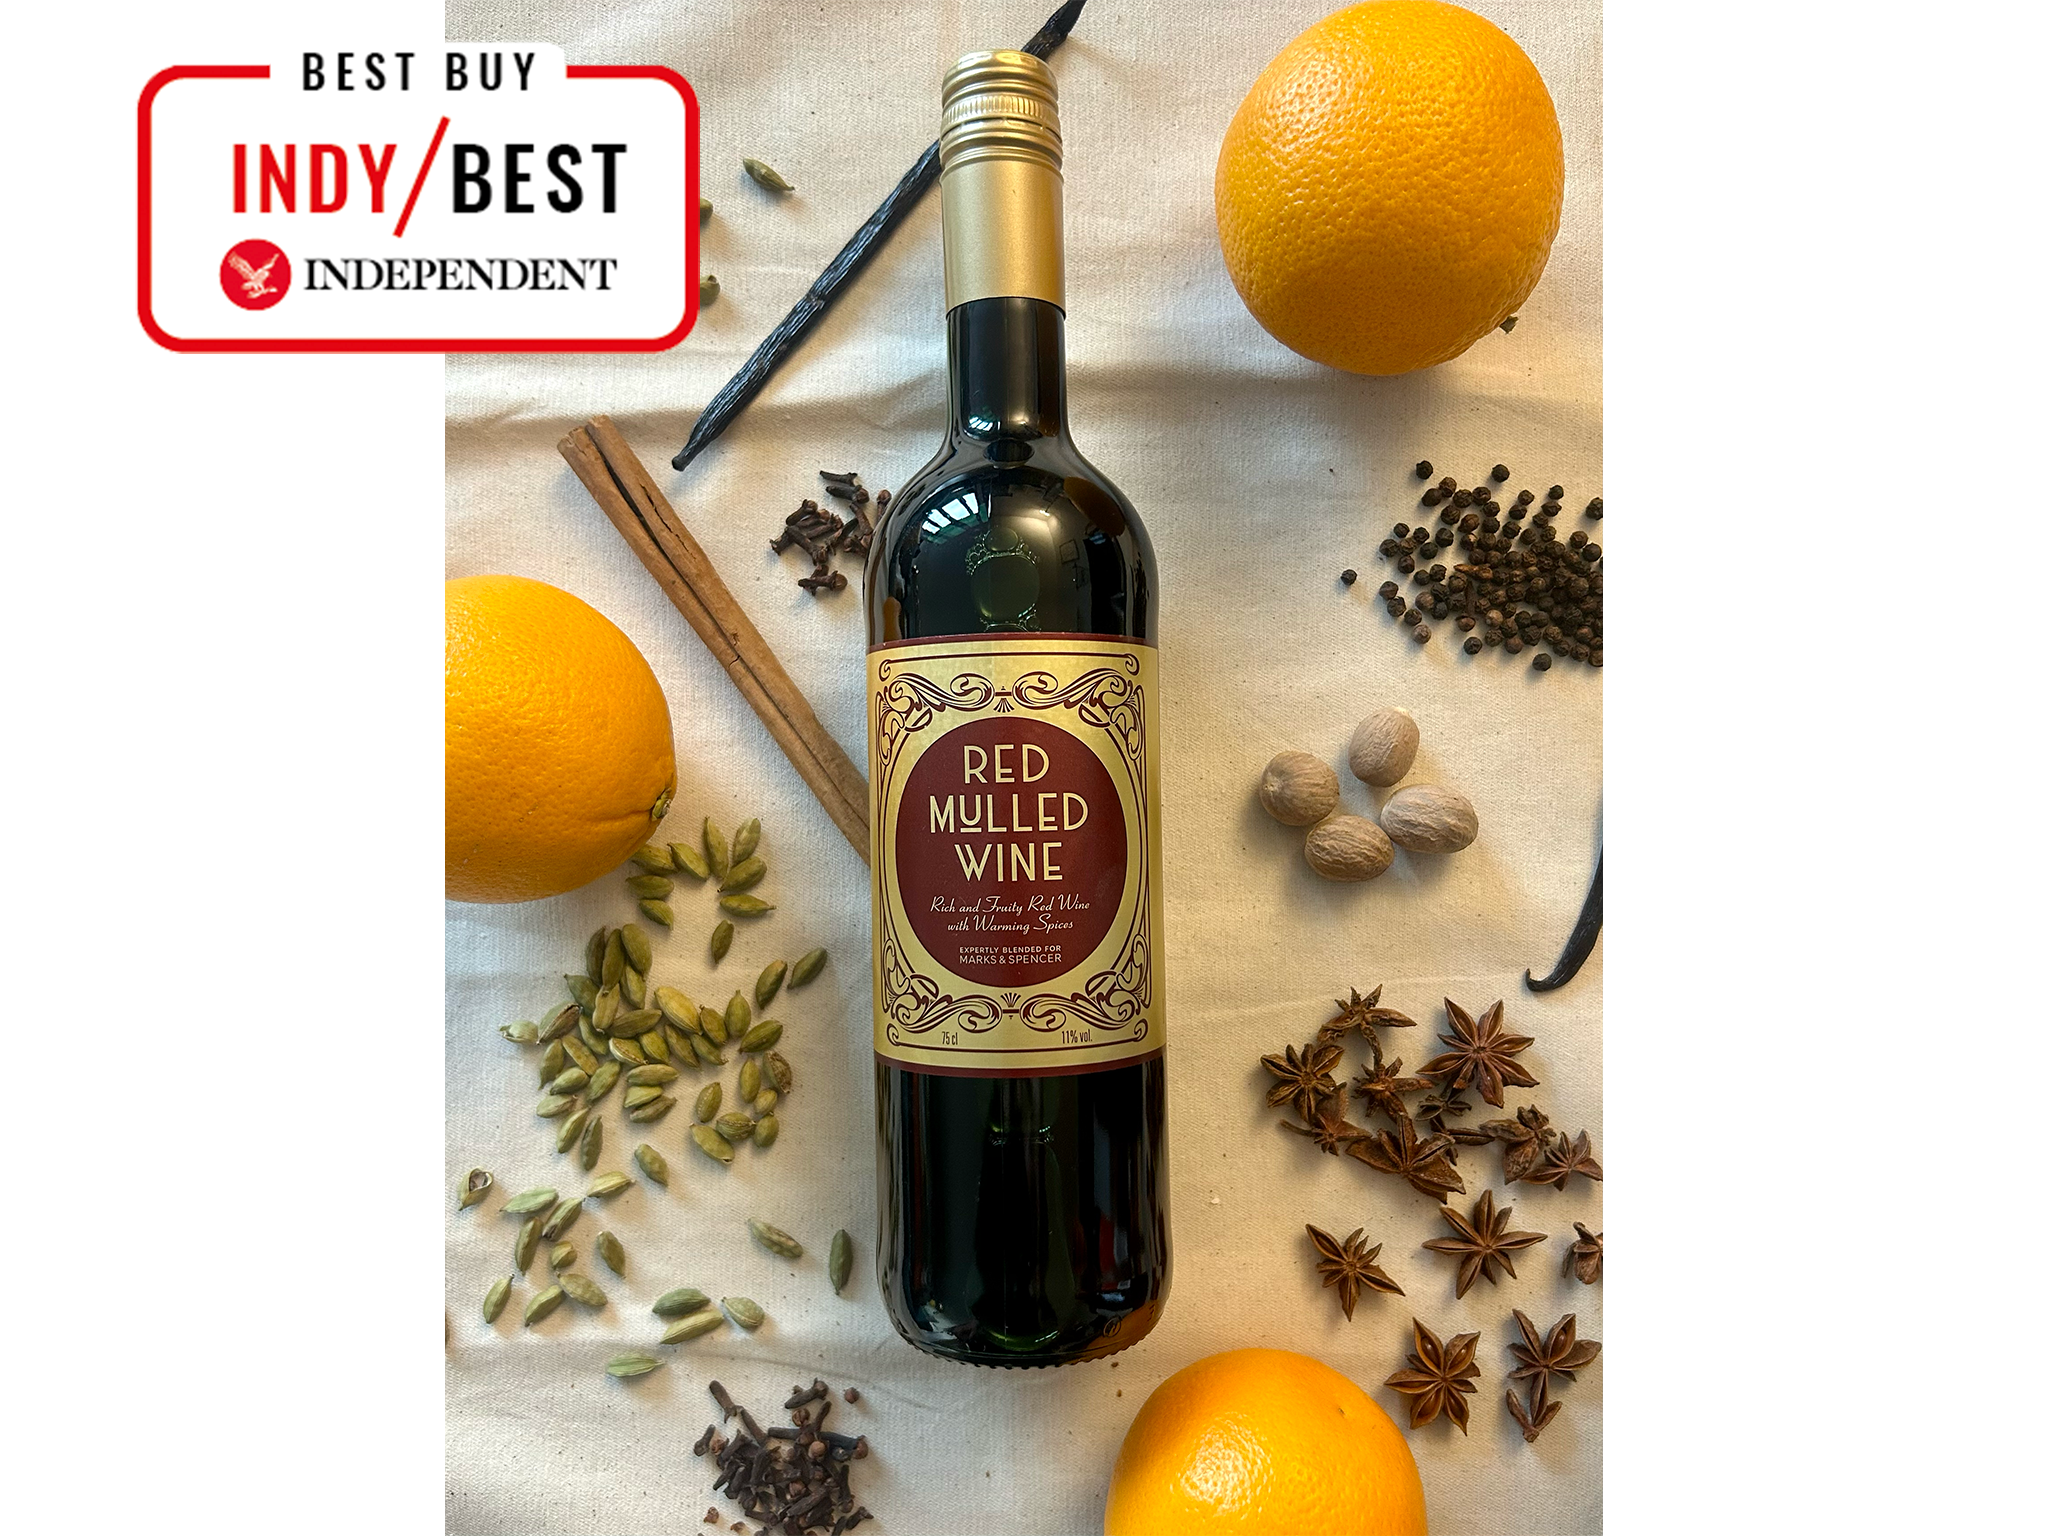 M&S red mulled wine